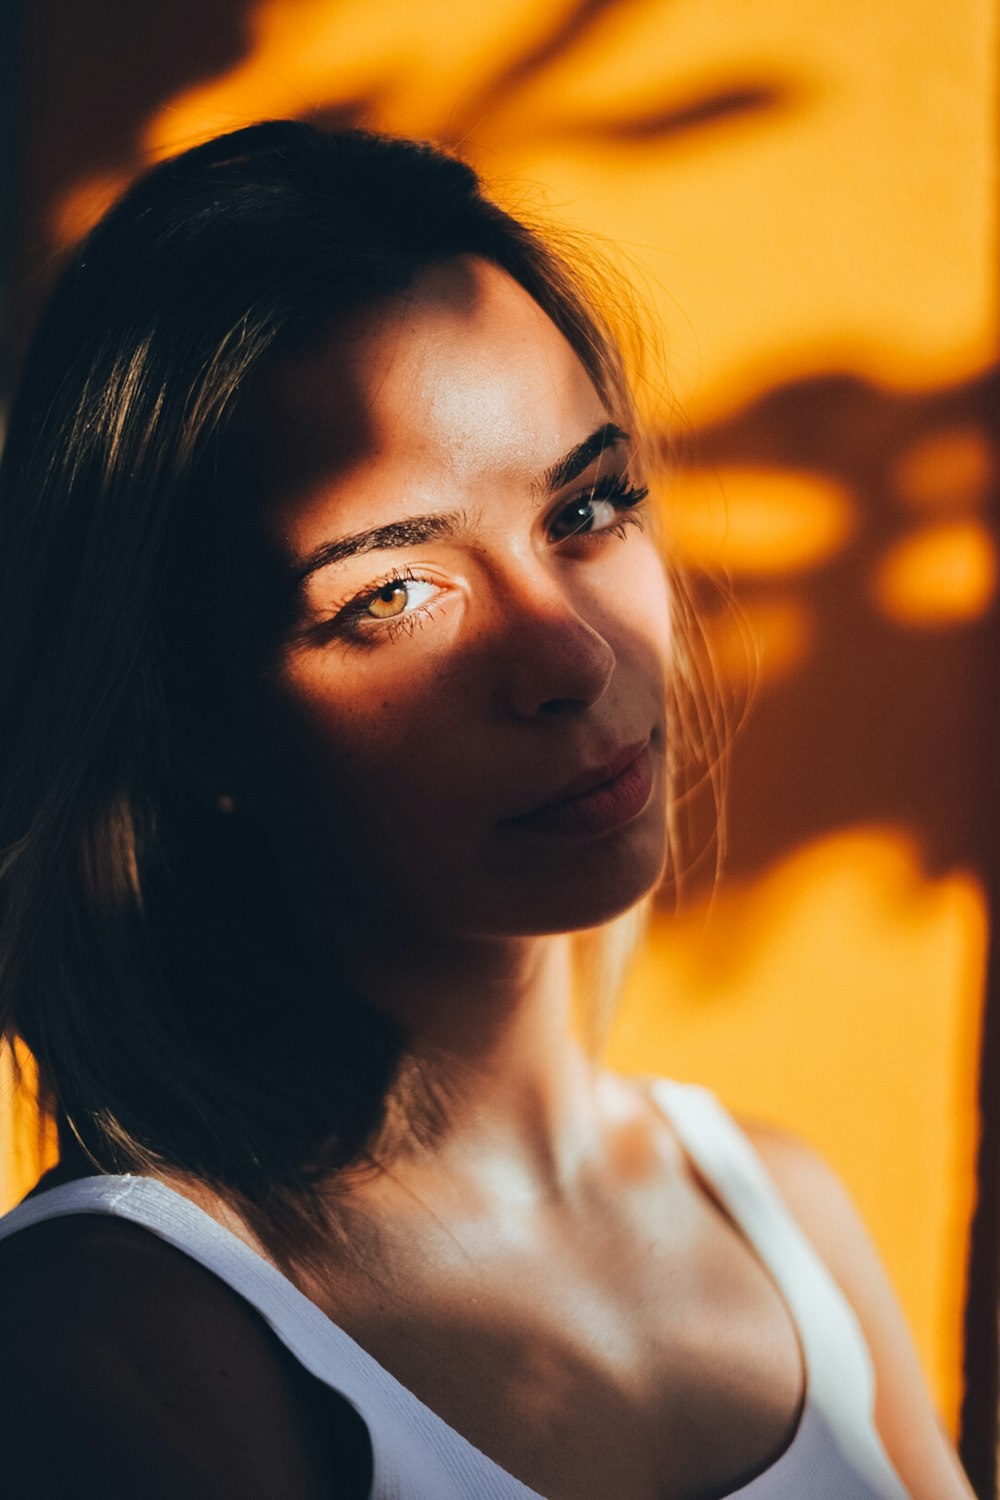 Women Pictures | Download Free Images & Stock Photos on Unsplash